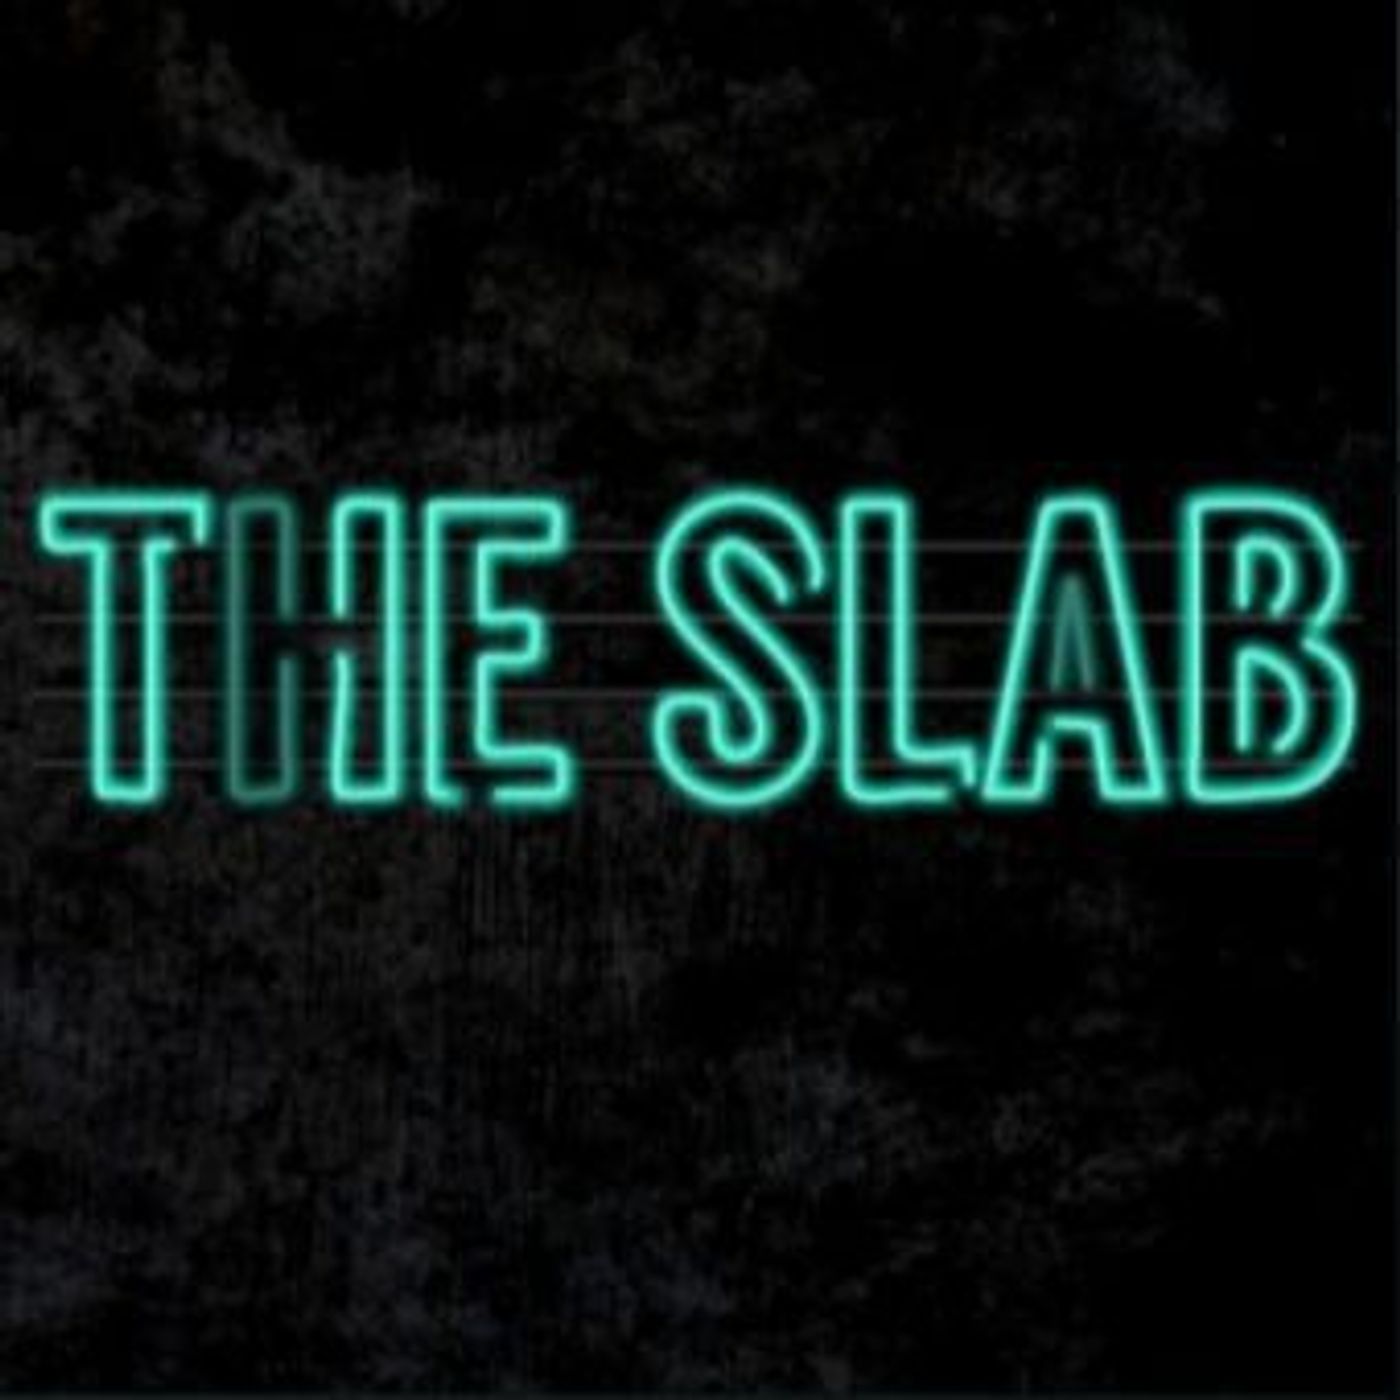 The Slab: Episode 1 - Bella in the Wych Elm